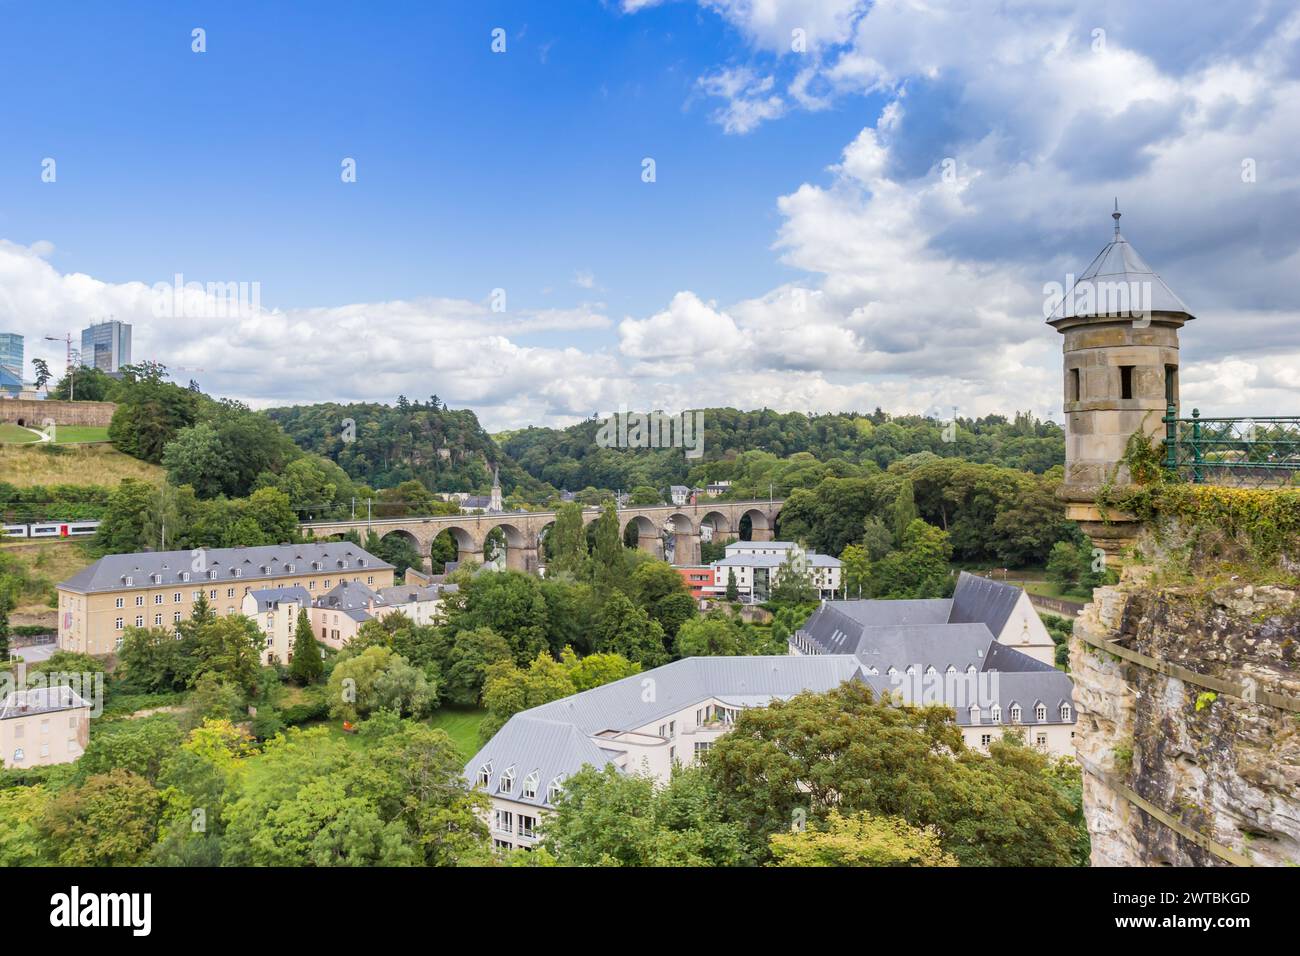 Spanish turret on the fortified walls of Luxembourg city Stock Photo